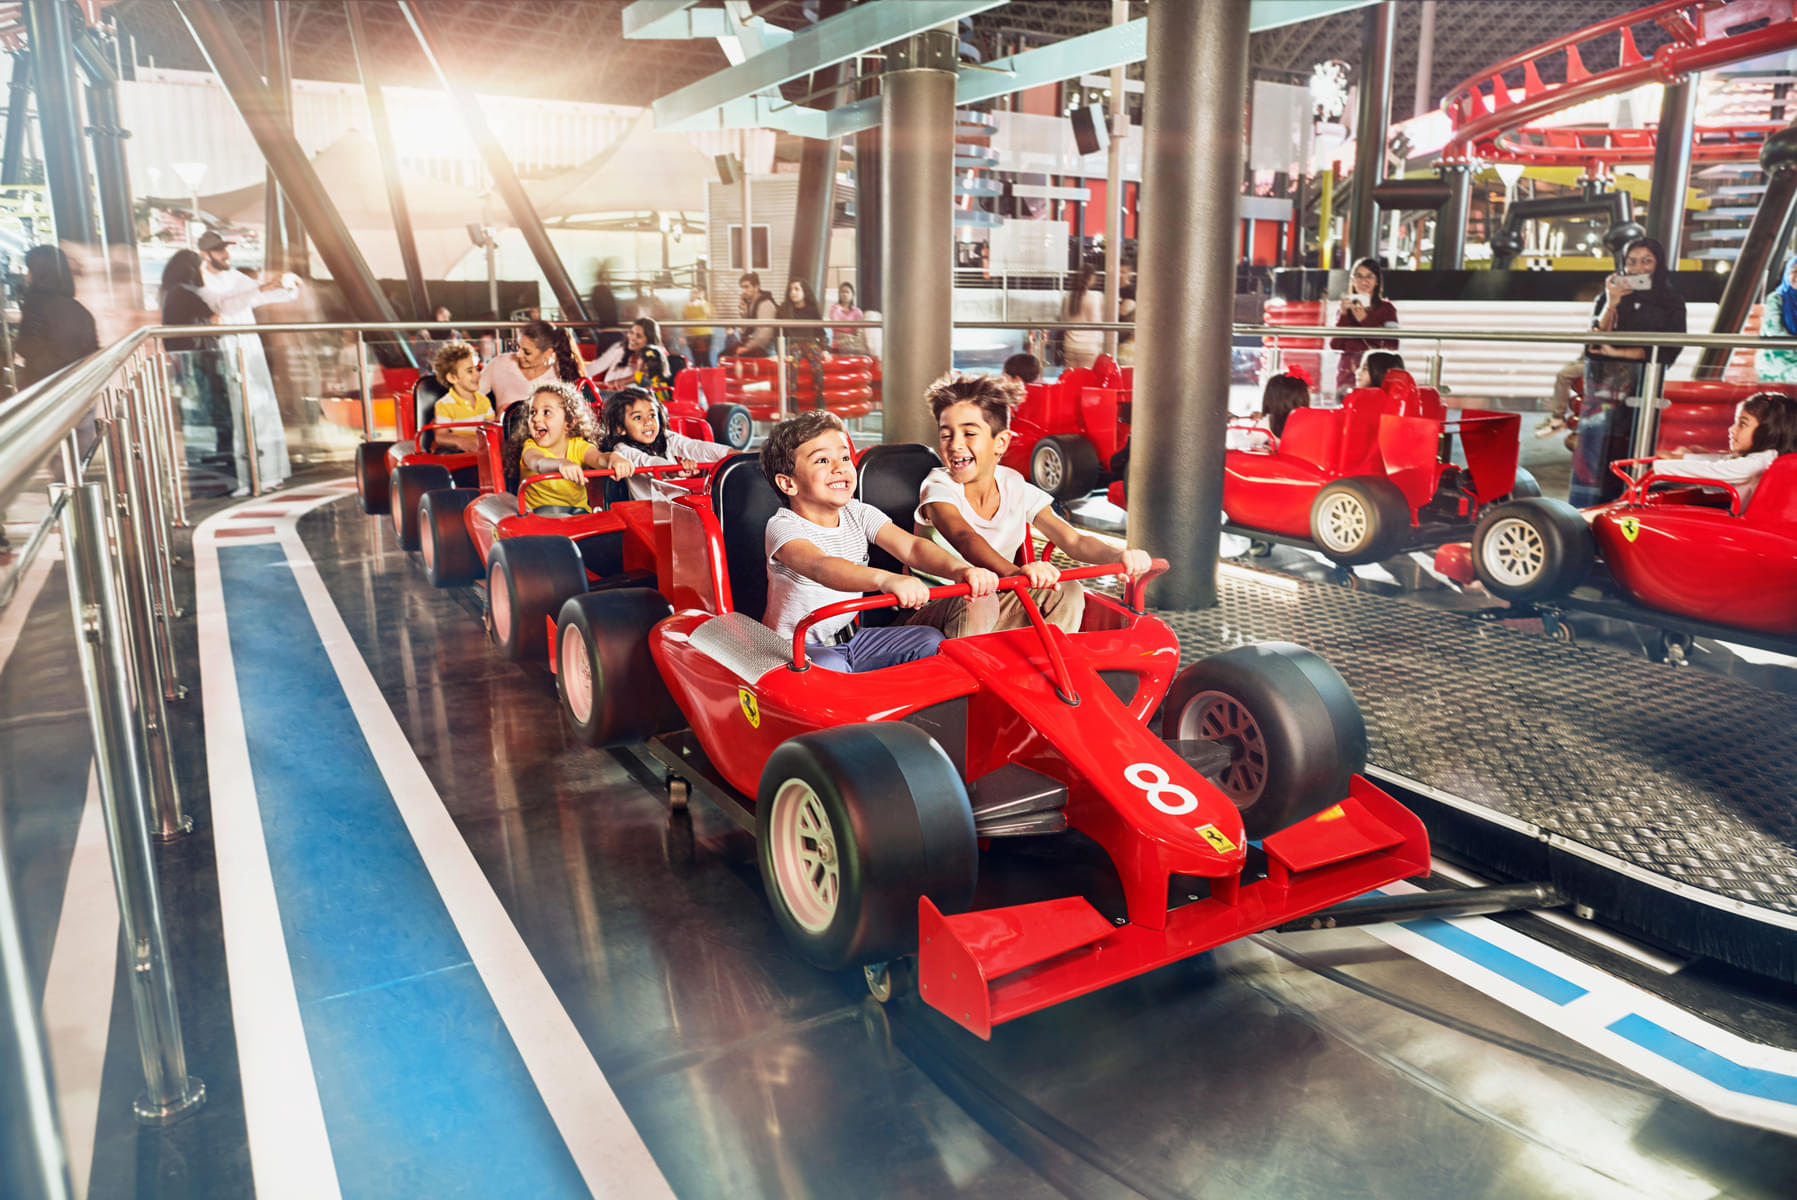 Have the adrenaline-fueled thrill of high-speed racing at the Speedway Race ride